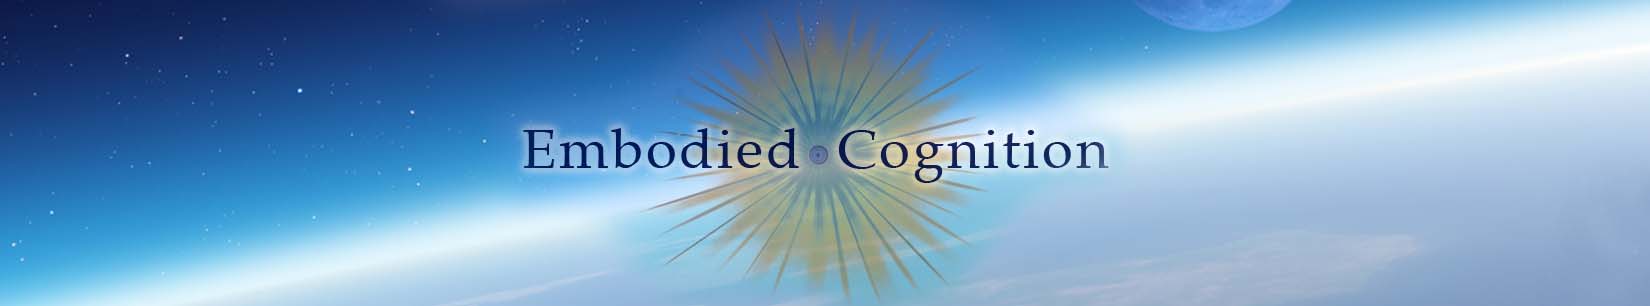 embodied cognition